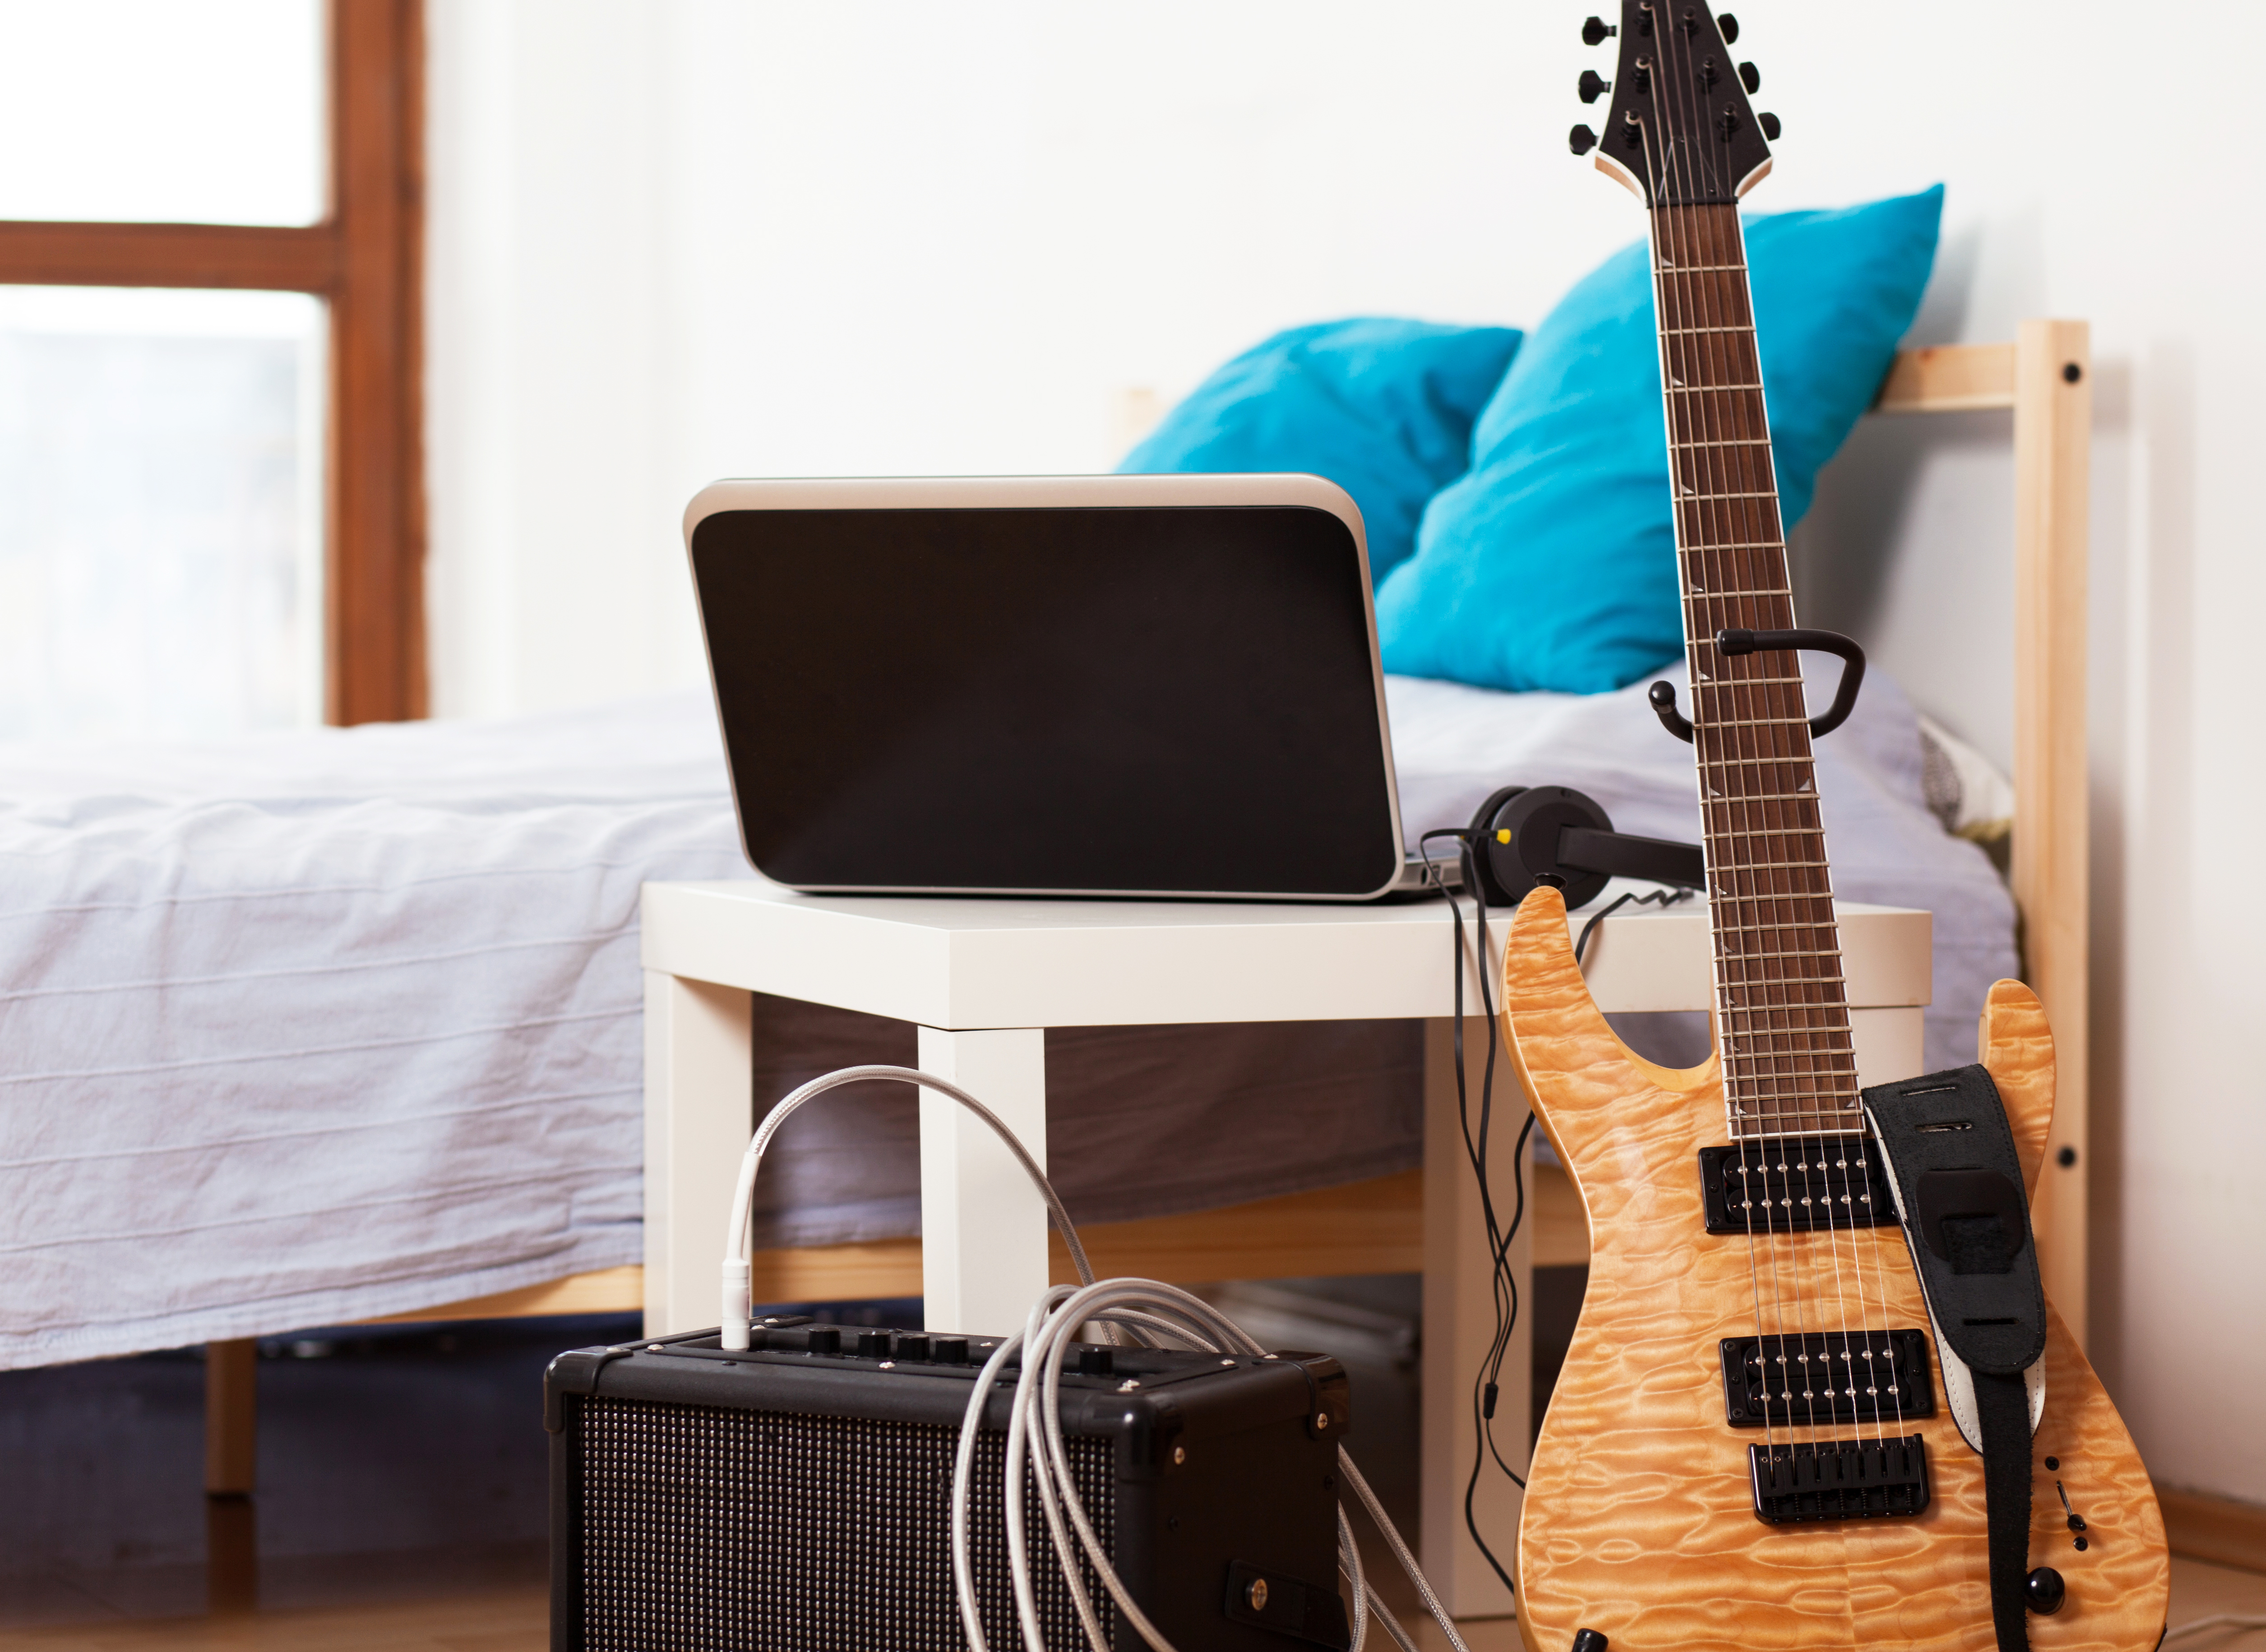 Guitar with an amp and other accessories next to it leaning against a table